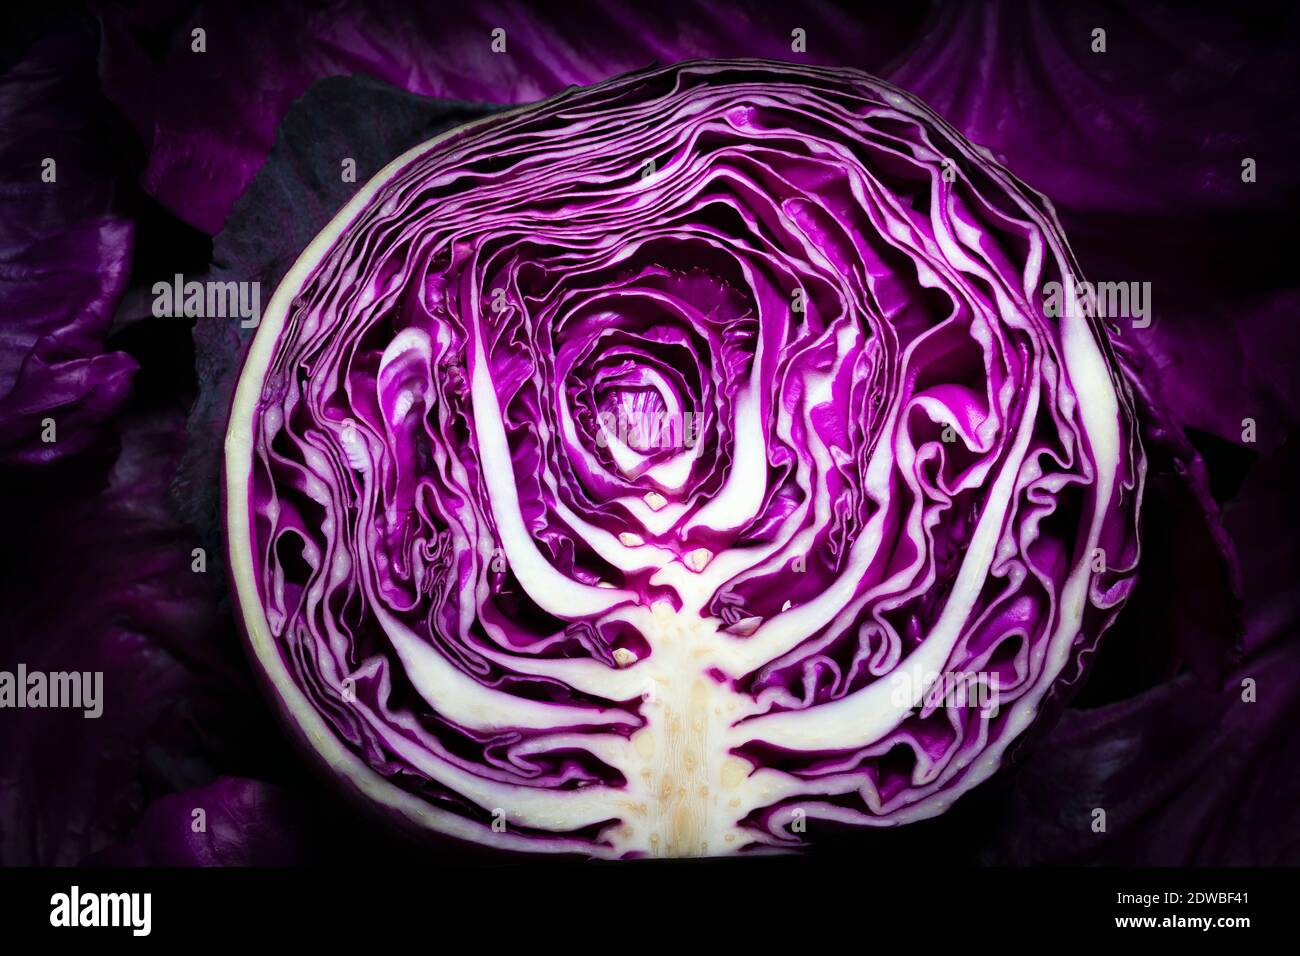 Half a red cabbage showing the inside textured layers of leaves. Stock Photo